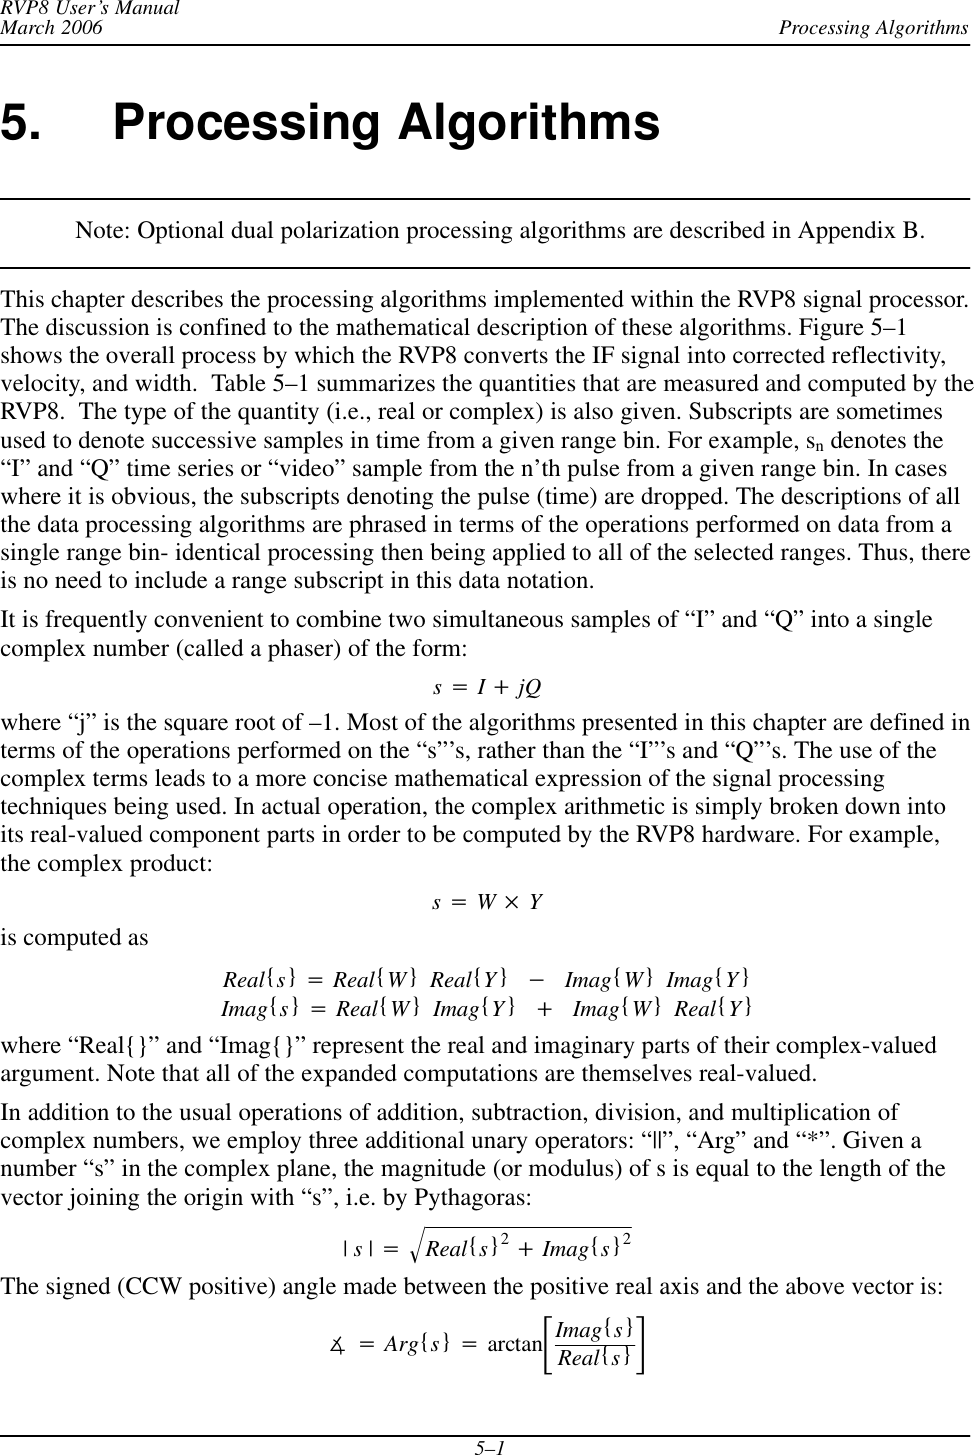 Processing AlgorithmsRVP8 User’s ManualMarch 20065–15. Processing AlgorithmsNote: Optional dual polarization processing algorithms are described in Appendix B.This chapter describes the processing algorithms implemented within the RVP8 signal processor.The discussion is confined to the mathematical description of these algorithms. Figure 5–1shows the overall process by which the RVP8 converts the IF signal into corrected reflectivity,velocity, and width.  Table 5–1 summarizes the quantities that are measured and computed by theRVP8.  The type of the quantity (i.e., real or complex) is also given. Subscripts are sometimesused to denote successive samples in time from a given range bin. For example, sn denotes the“I” and “Q” time series or “video” sample from the n’th pulse from a given range bin. In caseswhere it is obvious, the subscripts denoting the pulse (time) are dropped. The descriptions of allthe data processing algorithms are phrased in terms of the operations performed on data from asingle range bin- identical processing then being applied to all of the selected ranges. Thus, thereis no need to include a range subscript in this data notation.It is frequently convenient to combine two simultaneous samples of “I” and “Q” into a singlecomplex number (called a phaser) of the form:s+I)jQwhere “j” is the square root of –1. Most of the algorithms presented in this chapter are defined interms of the operations performed on the “s”’s, rather than the “I”’s and “Q”’s. The use of thecomplex terms leads to a more concise mathematical expression of the signal processingtechniques being used. In actual operation, the complex arithmetic is simply broken down intoits real-valued component parts in order to be computed by the RVP8 hardware. For example,the complex product:s+W Yis computed asReal{s}+Real{W}Real{Y}*Imag{W}Imag{Y}Imag{s}+Real{W}Imag{Y})Imag{W}Real{Y}where “Real{}” and “Imag{}” represent the real and imaginary parts of their complex-valuedargument. Note that all of the expanded computations are themselves real-valued.In addition to the usual operations of addition, subtraction, division, and multiplication ofcomplex numbers, we employ three additional unary operators: “||”, “Arg” and “*”. Given anumber “s” in the complex plane, the magnitude (or modulus) of s is equal to the length of thevector joining the origin with “s”, i.e. by Pythagoras:|s|+Real{s}2)Imag{s}2ǸThe signed (CCW positive) angle made between the positive real axis and the above vector is:ë+Arg{s}+arctanƪImag{s}Real{s}ƫ